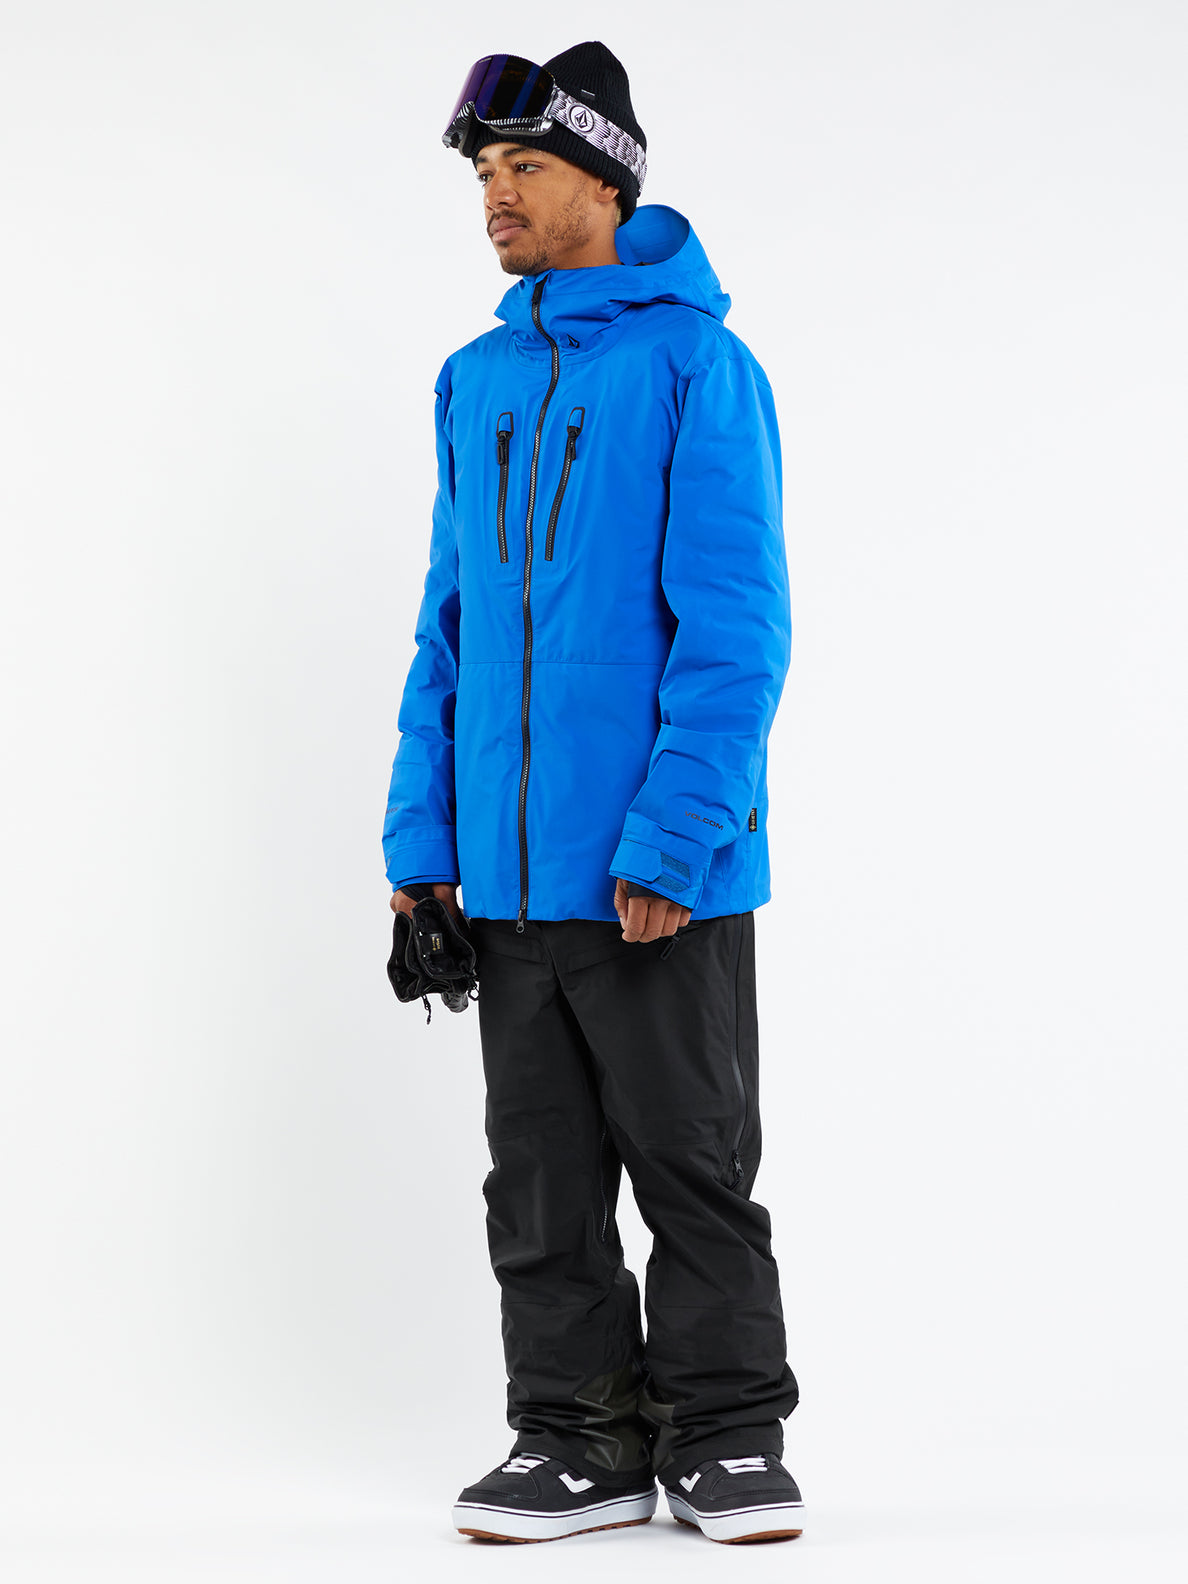 Mens Tds Infrared Gore-Tex Jacket - Electric Blue – Volcom US